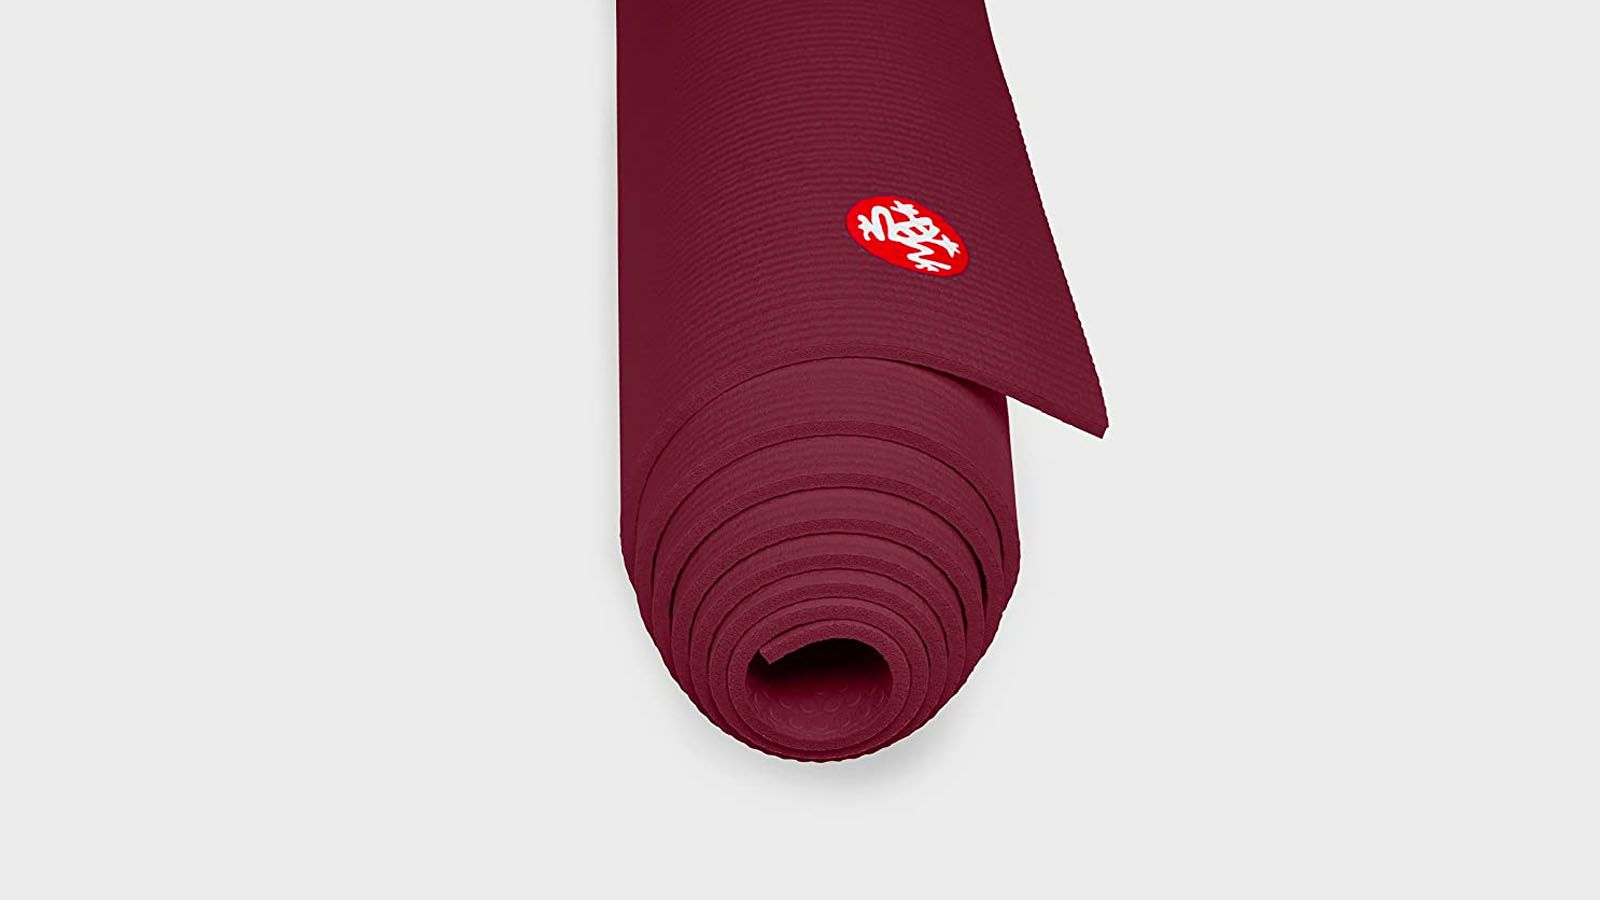 Best Yoga Mats - We've Tested Sweaty Betty, Lululemon and More